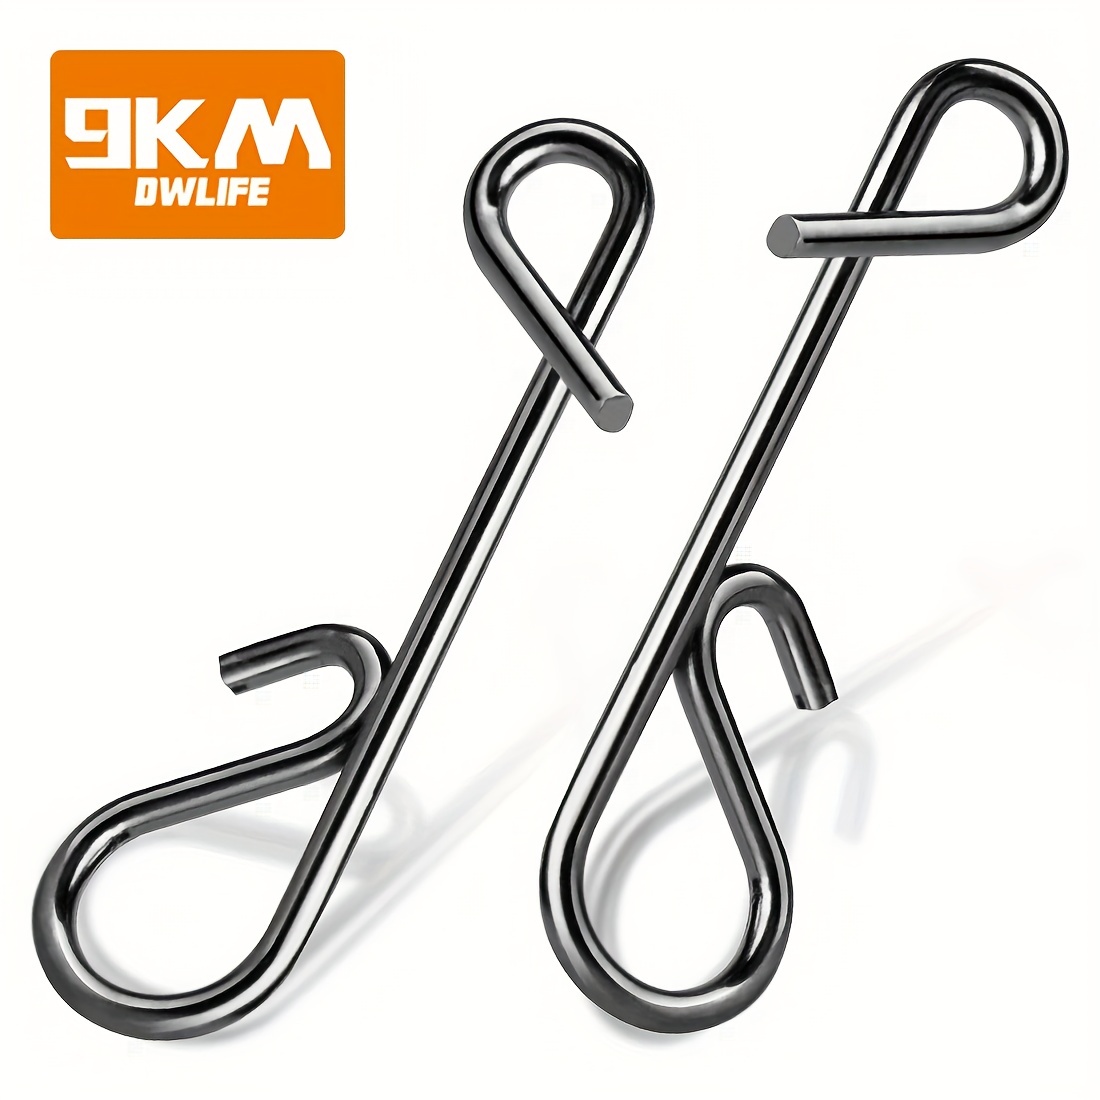 Fishing Clip Power Clips 50~200Pcs Stainless Steel Fishing Snaps For  Saltwater 